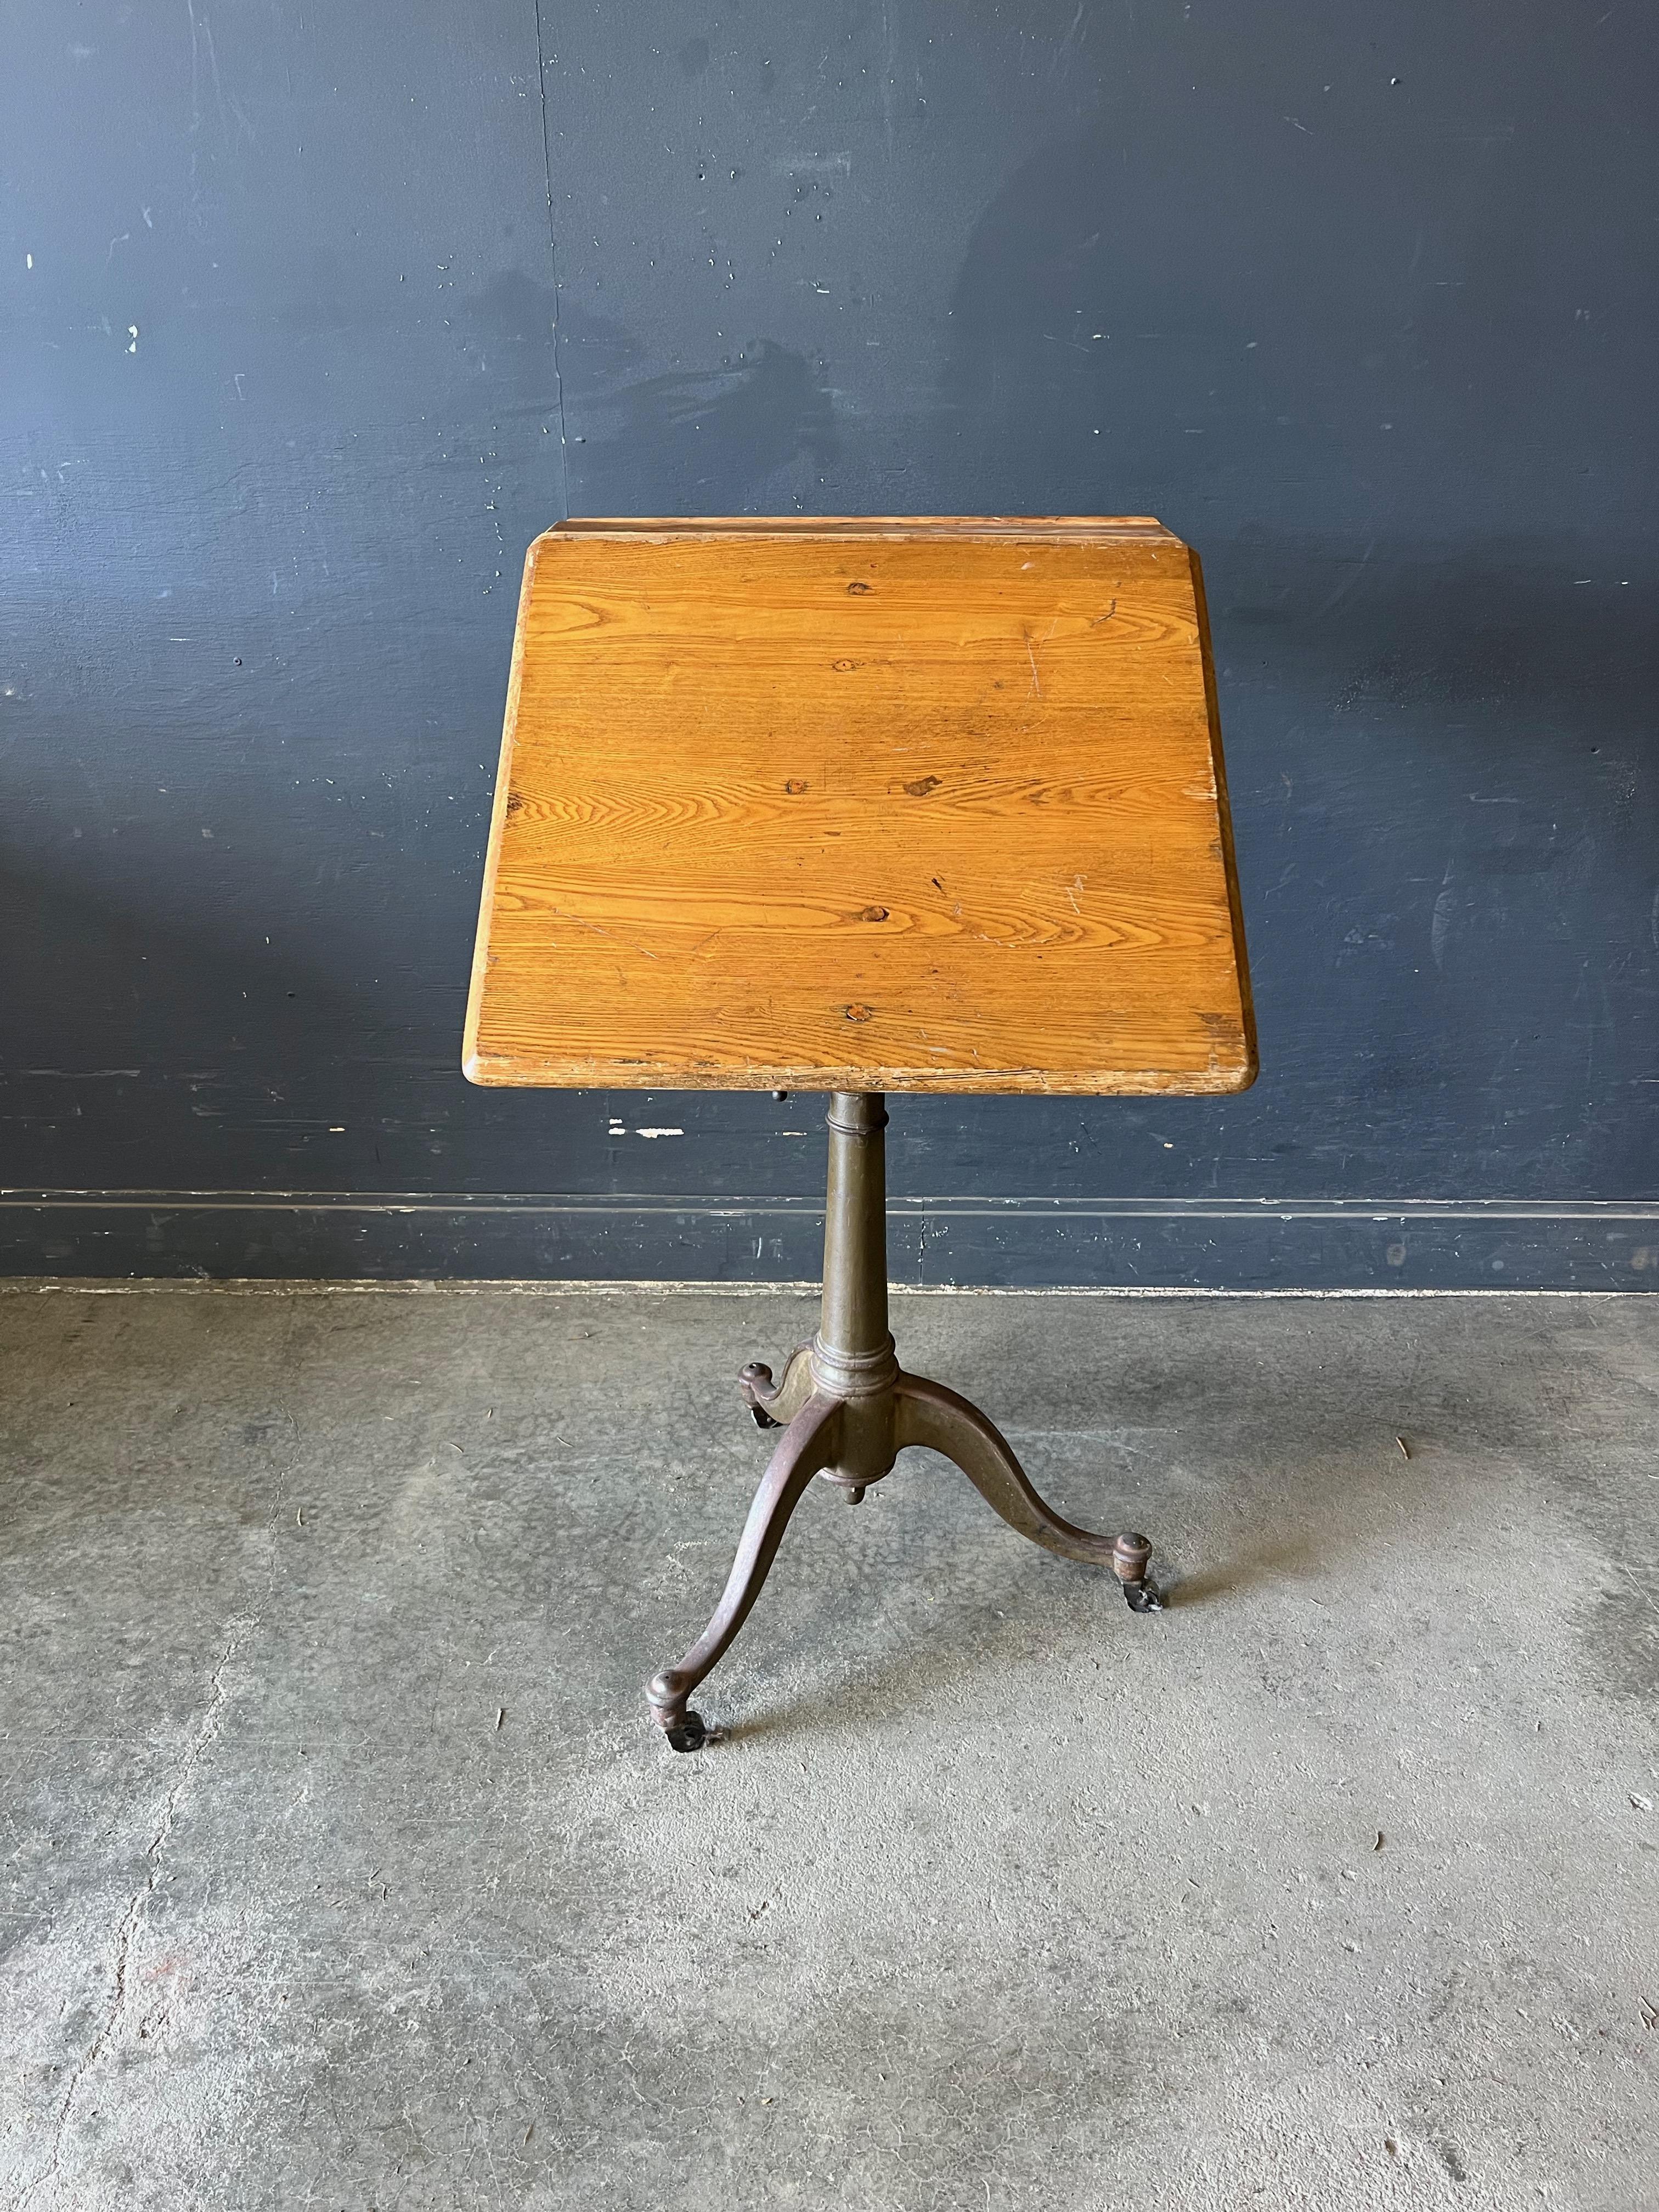 Industrial Vintage Adjustable c 1930 Cast Iron Drafting Table, nice early drafting table with original makers mark stamped on underside, adjustable from 30-42 inches. La table peut prendre plusieurs positions grâce à deux jeux de boutons de réglage